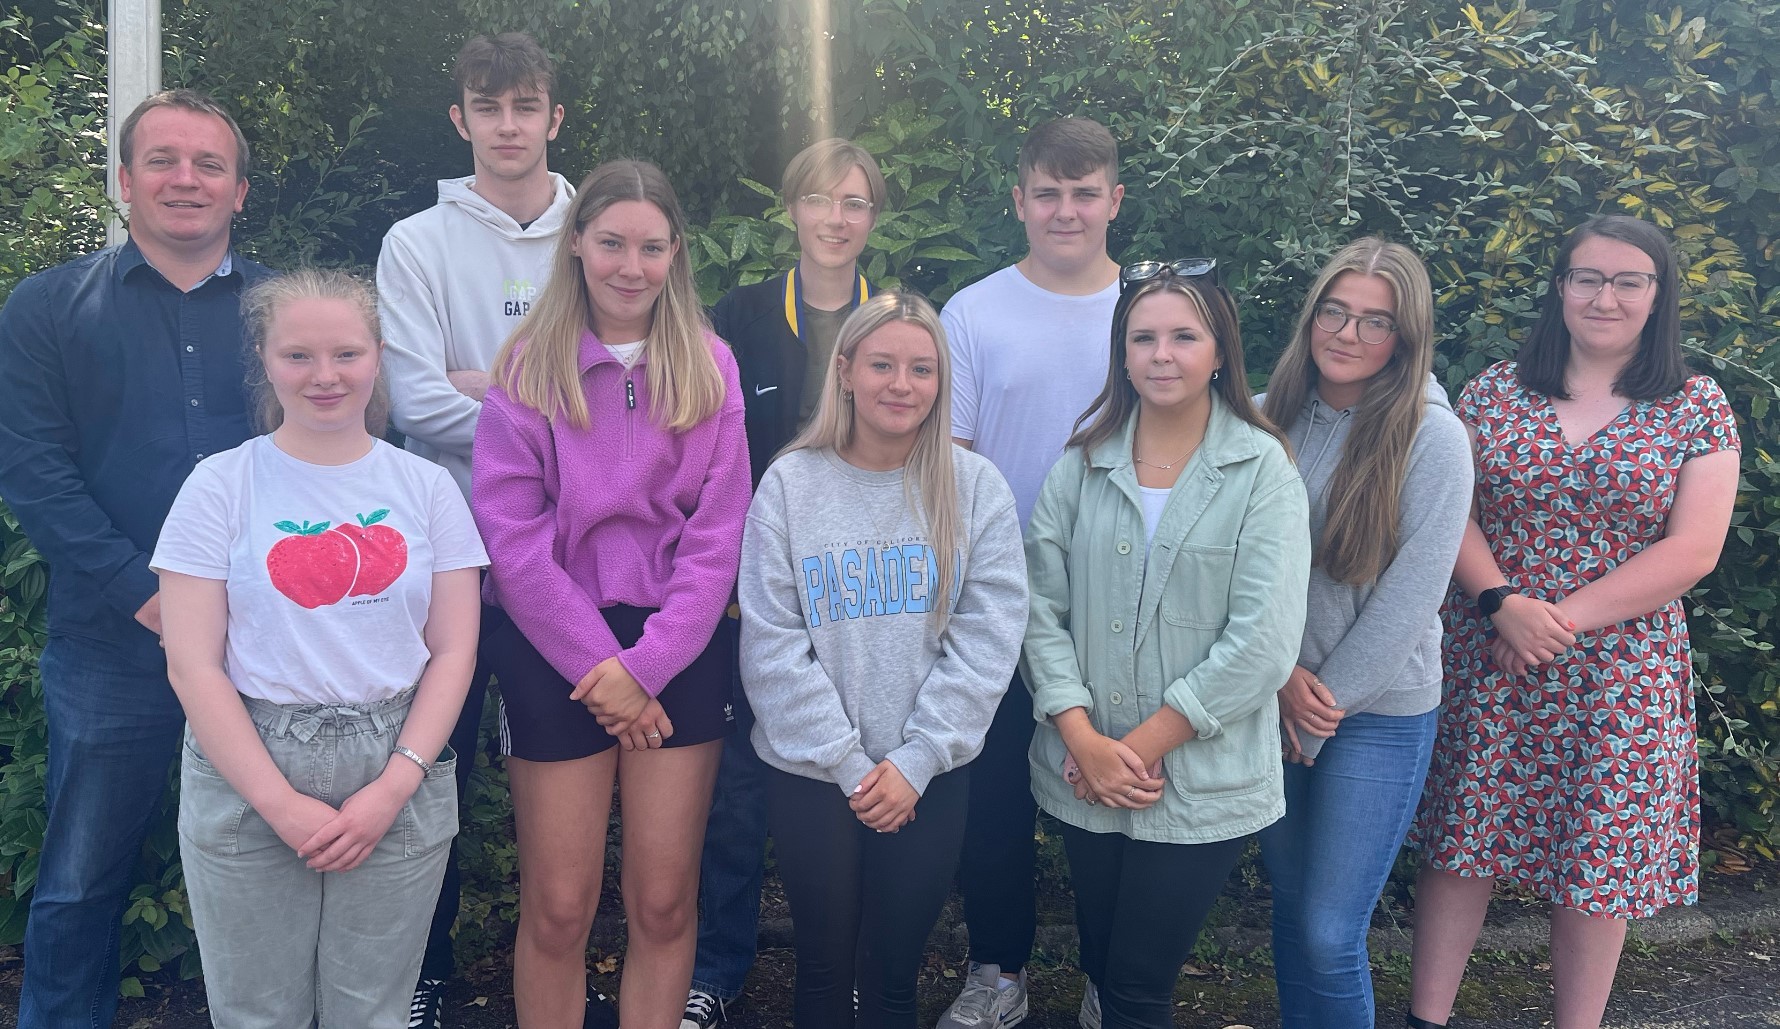 Devenish College students receiving their A-Level results. Front row, from left: Ashlyn Martin, Ellie McDonald, Connie Carson, Aimee Knox, Nia Robinson and Holly Bullock. Back row, from left: Principal Simon Mowbray, Ethan Malone, Matthew Graham and Joe